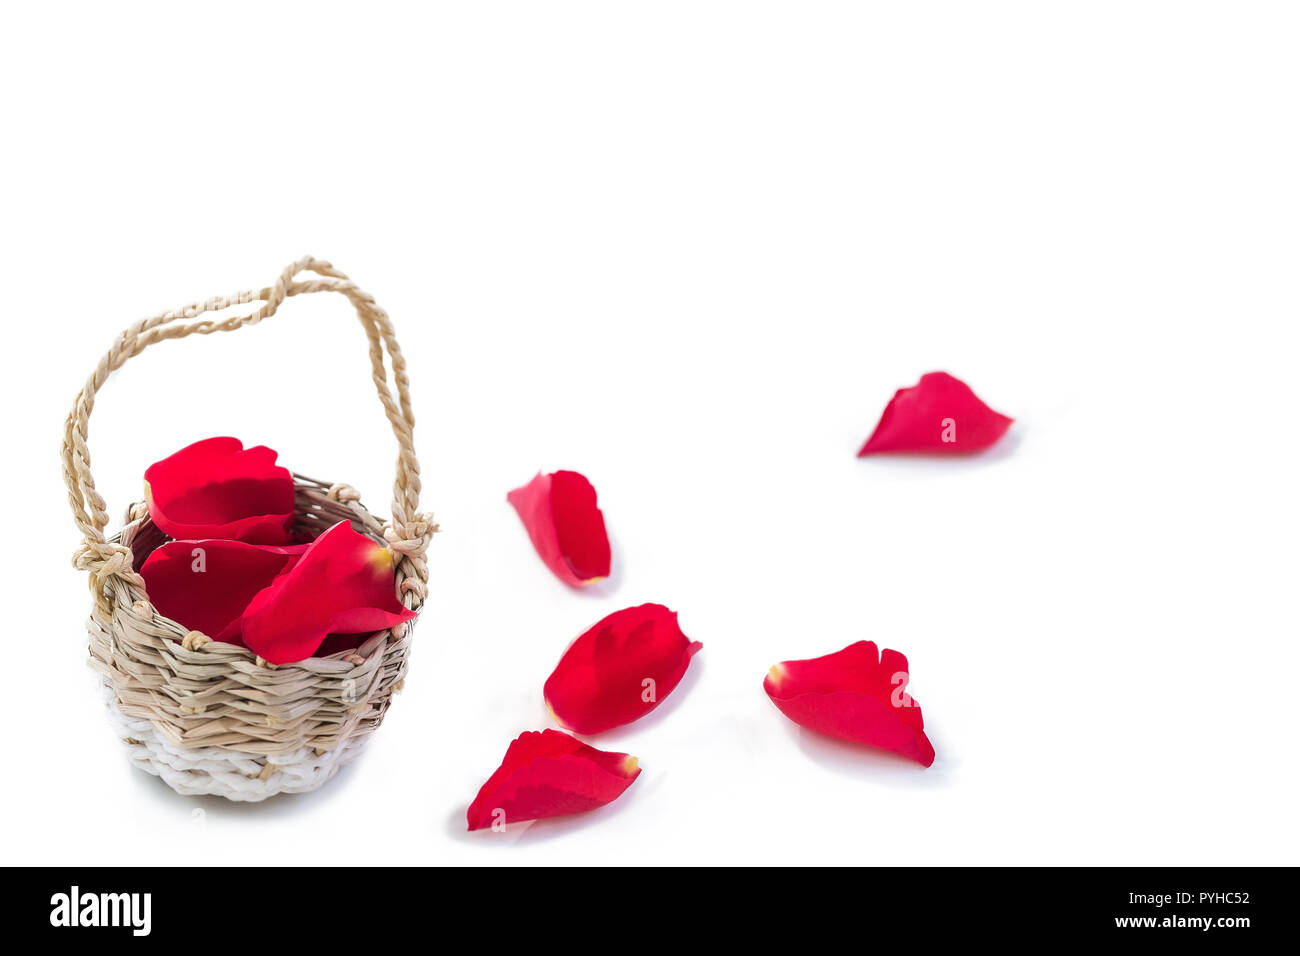 Wicker Basket of Red Petals Rose, with some on the ground on White Background, Valentine's Day Love Romance Wedding Feast Concept of Love Symbol of Luxury Tenderness, Spa, Stock Photo